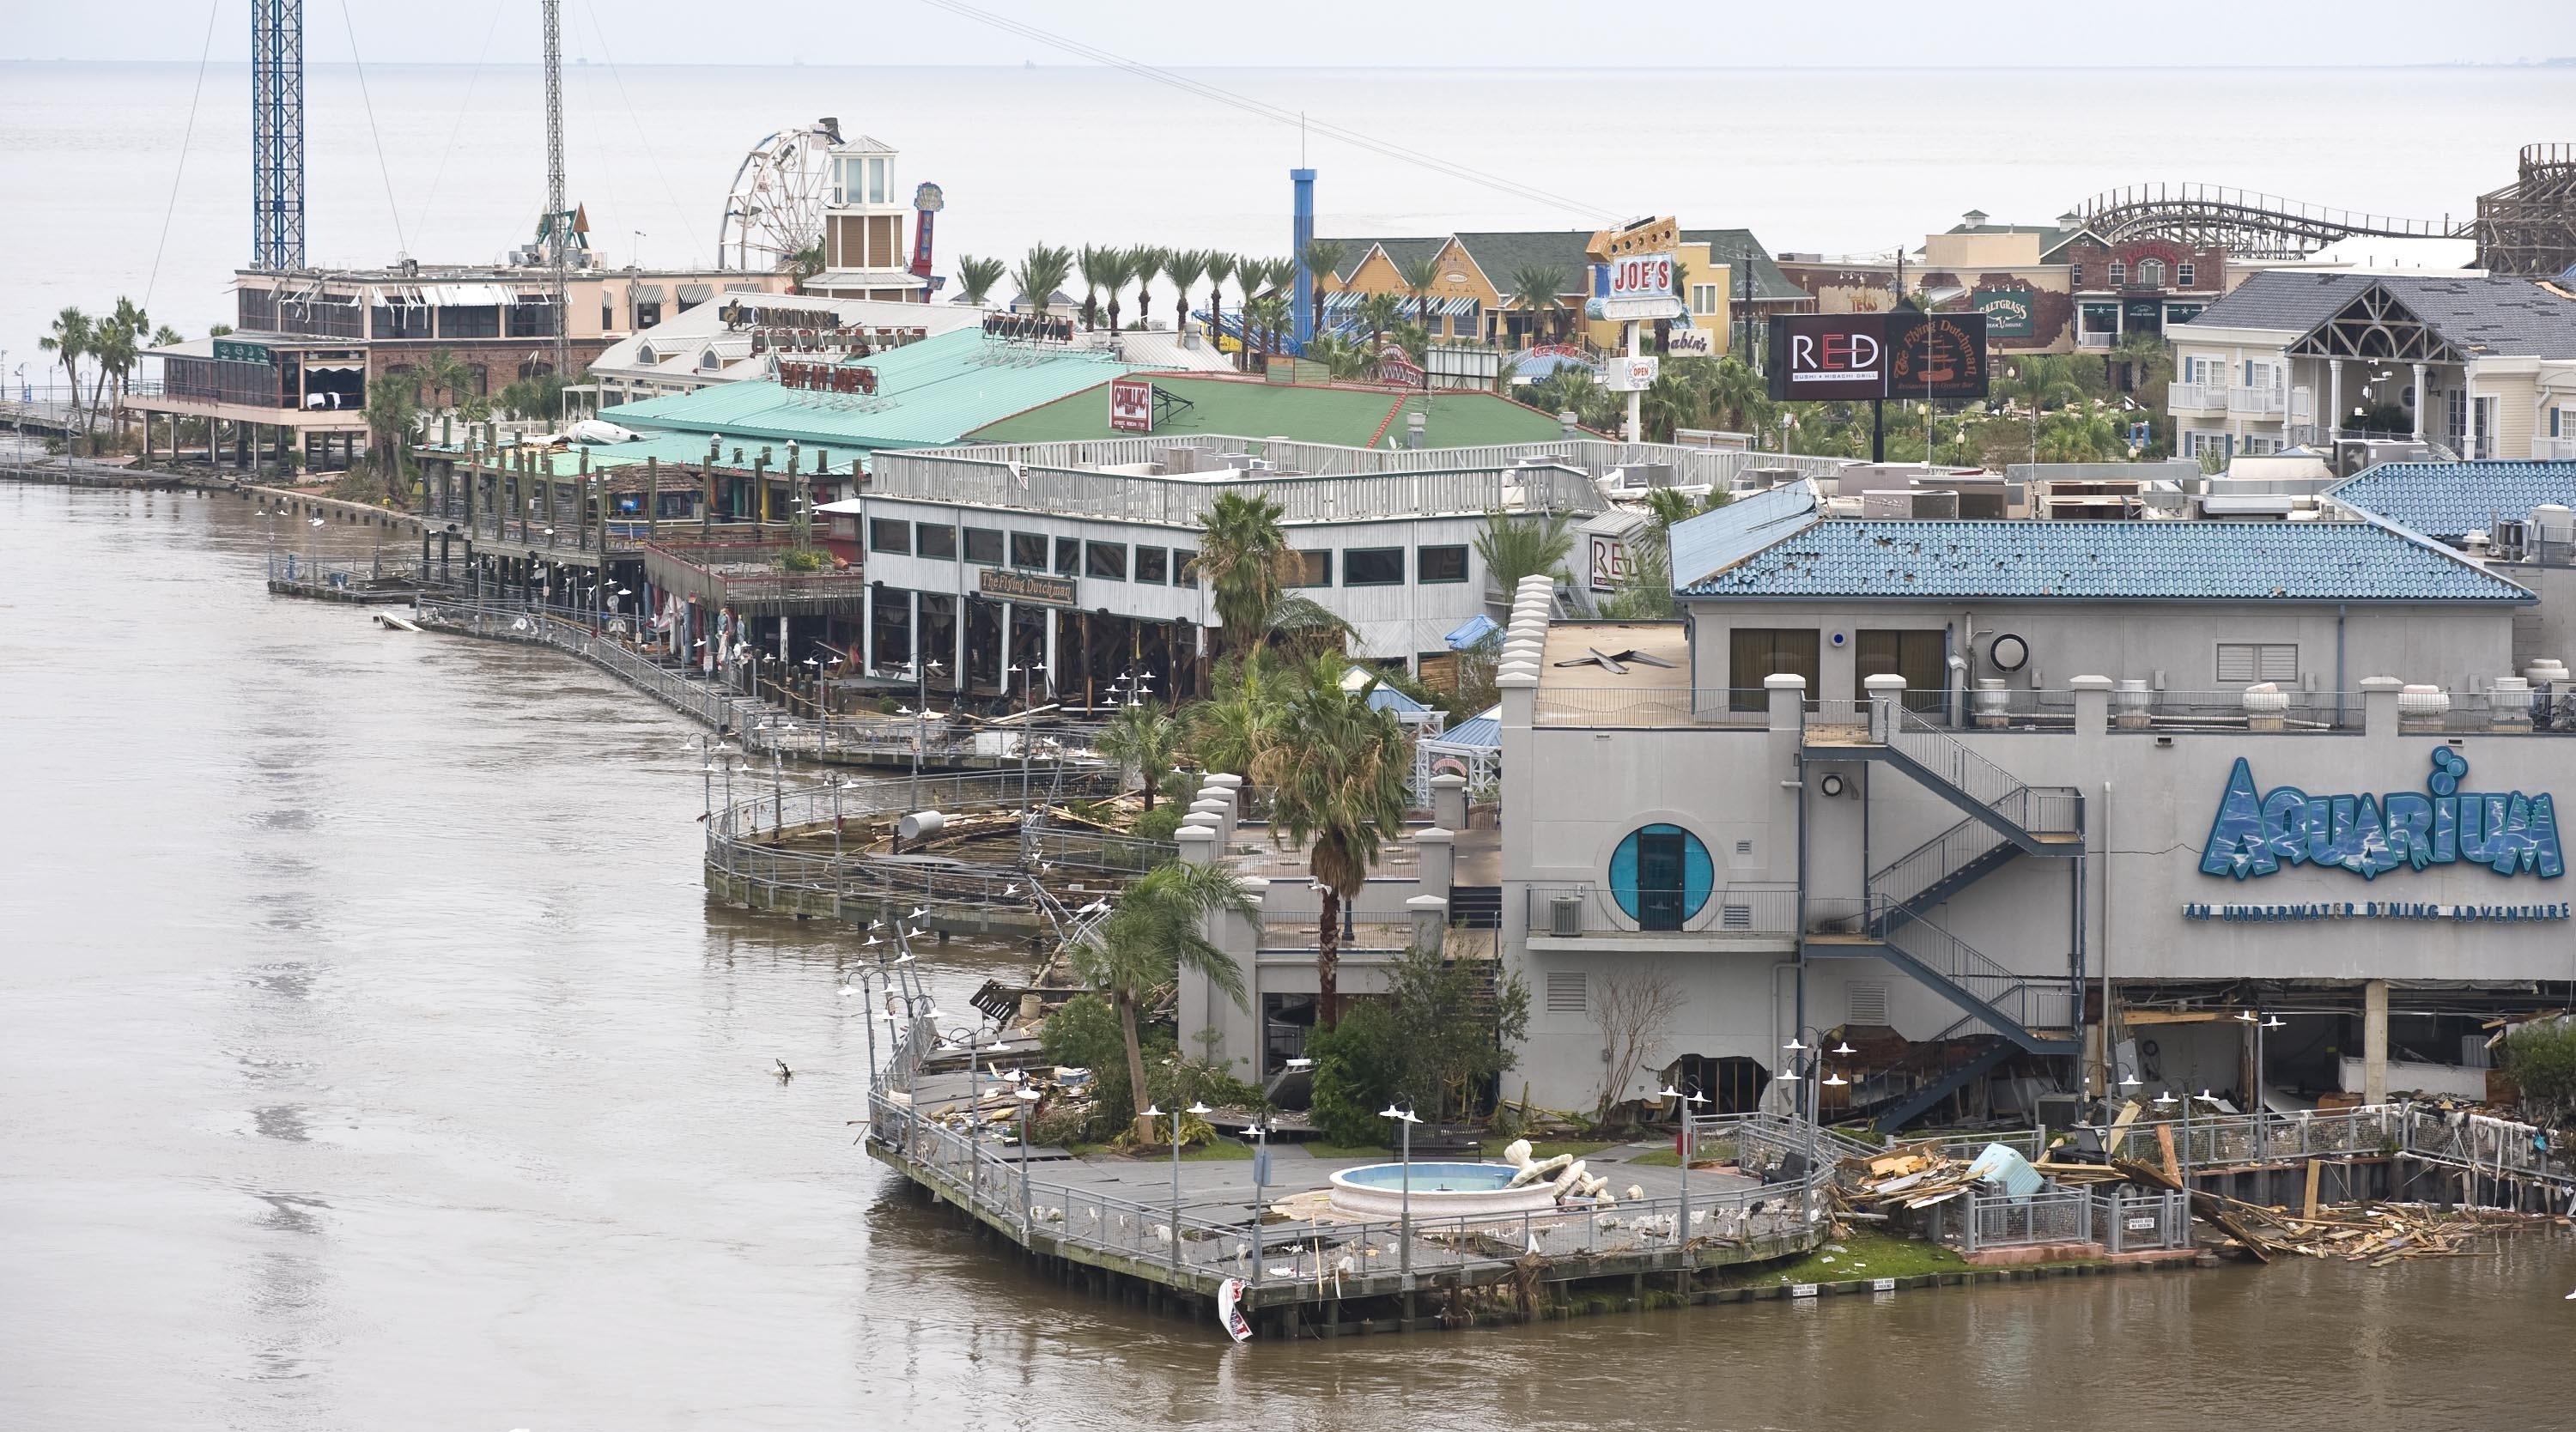 KEMAH, TX - SEPTEMBER 14: The Boardwalk, a popular restaurant district, sits damaged September 14, 2008 in Kemah, Texas. Hurricane Ike made landfall yesterday morning at Galveston causing widespread wind and flood damage along the Texas and Louisiana coasts. Kemah is located on Galveston Bay. (Photo by Dave Einsel/Getty Images)